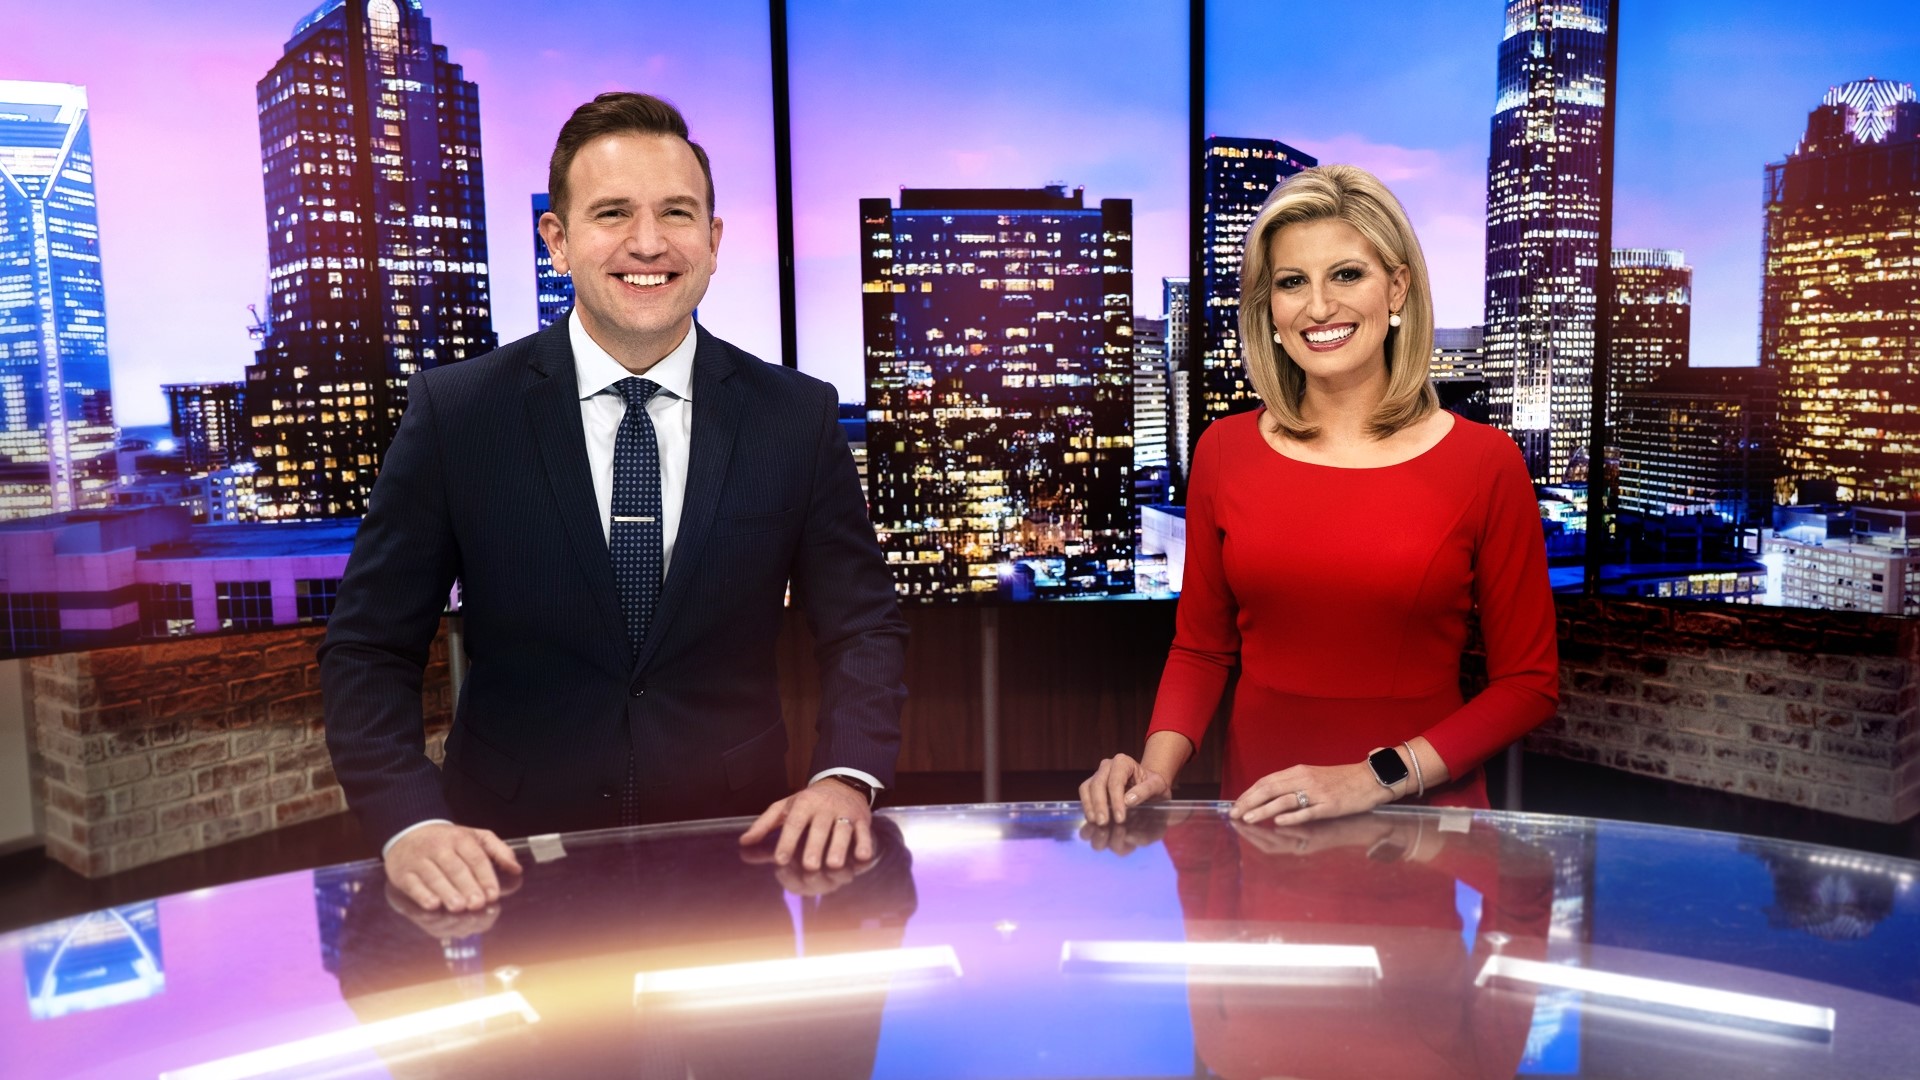 WCNC Charlotte News Team gives you updates on the latest local, regional and national news events of the day, as well as updates on sports, weather and traffic.